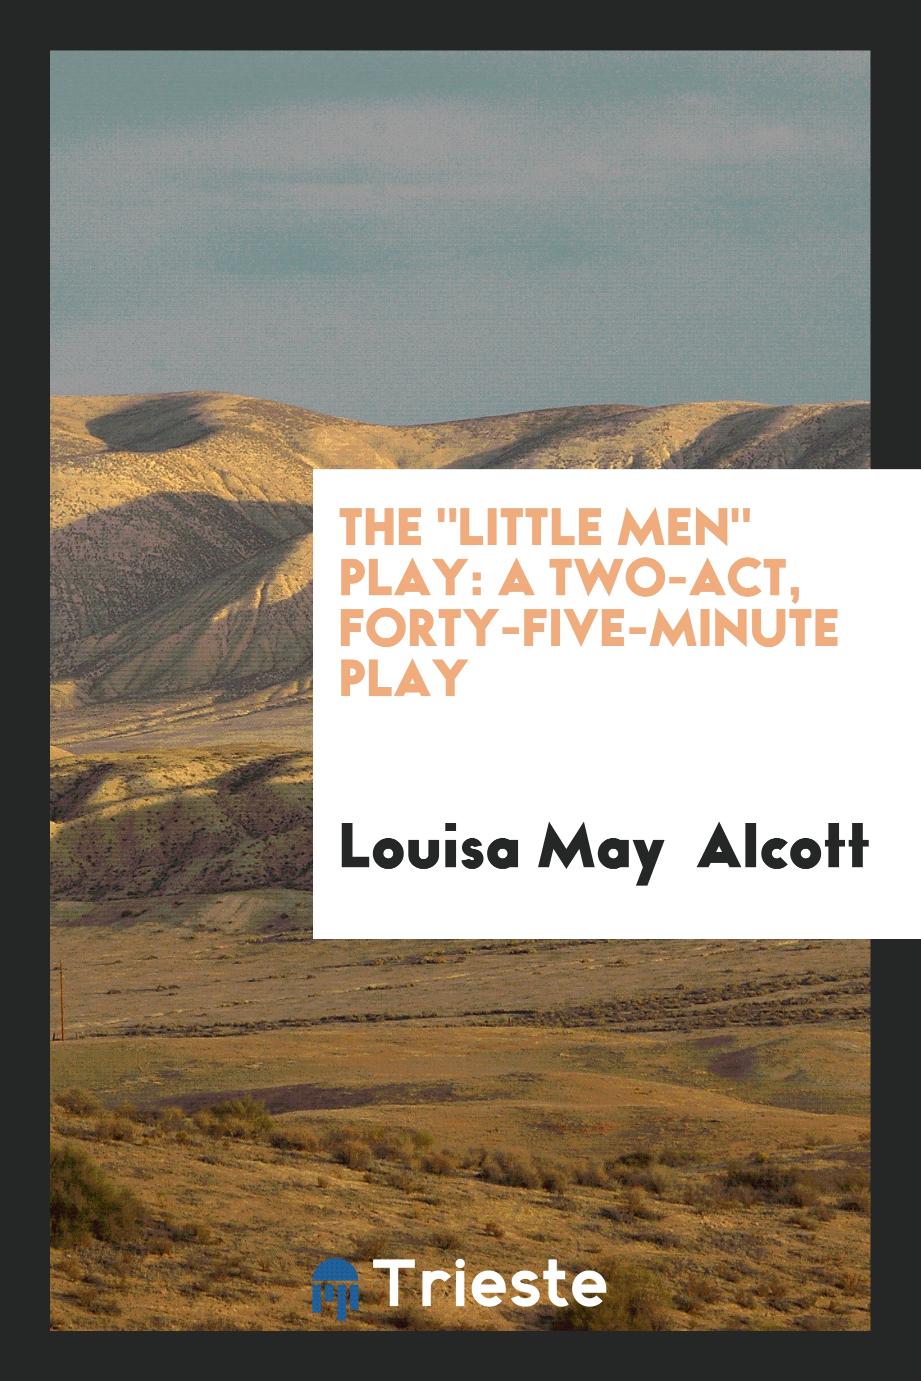 The "Little Men" Play: A Two-Act, Forty-Five-Minute Play